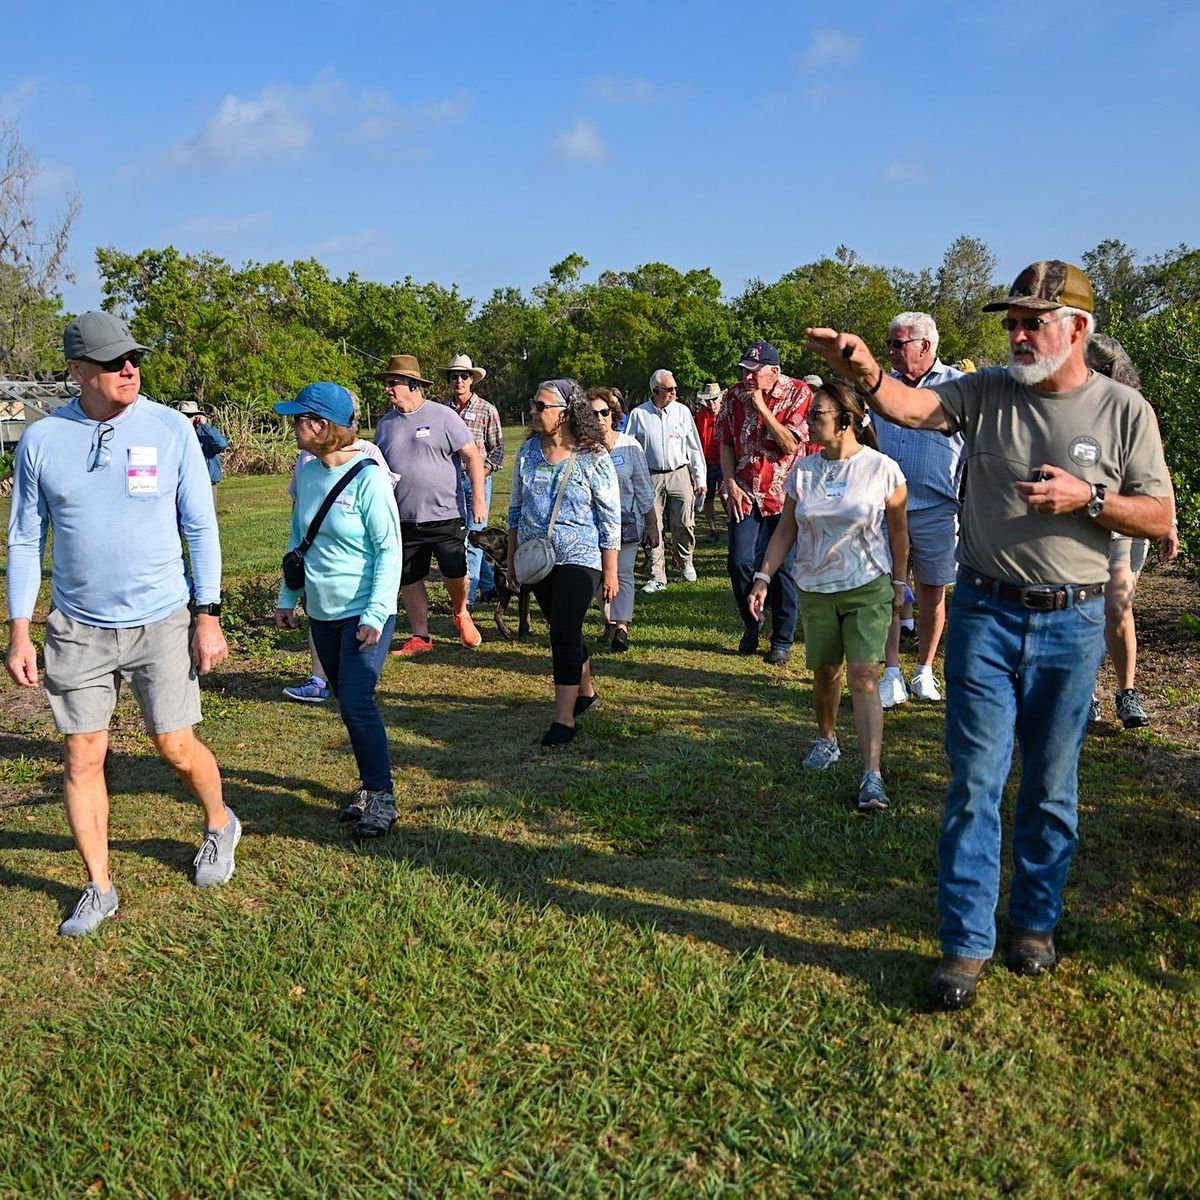 Sarasota County Farm and Ranch Tour: Learn Our Agricultural Roots